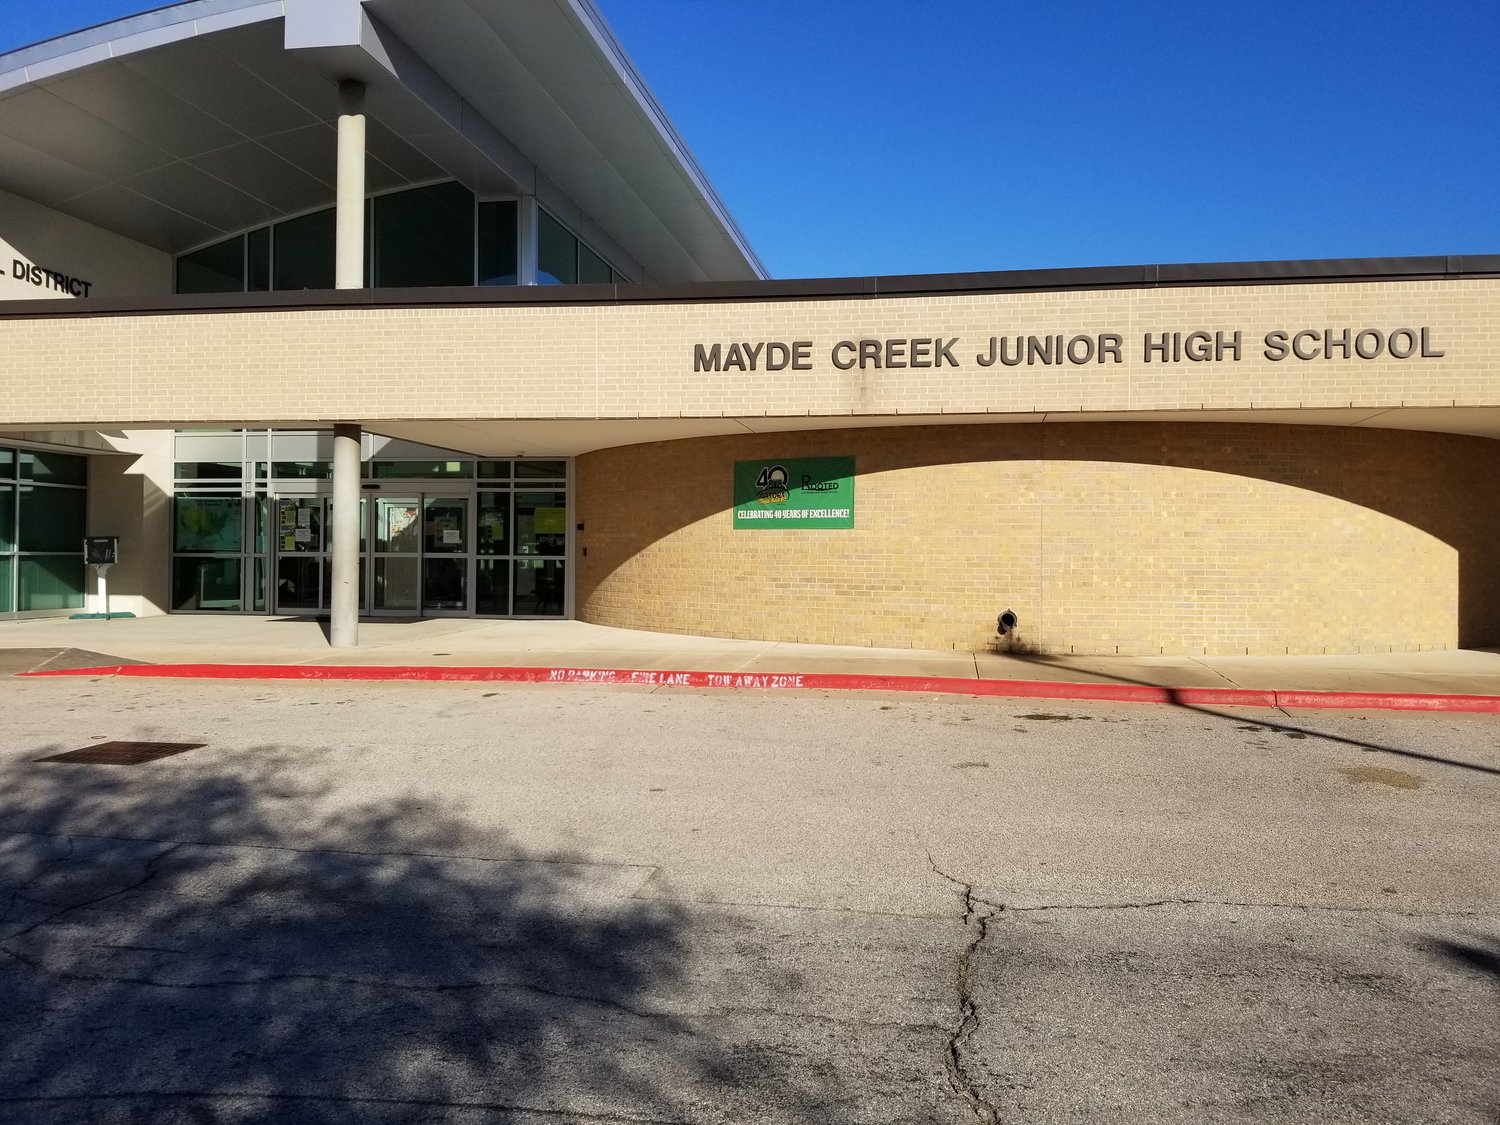 A cell phone battery began smoking at Mayde Creek Junior High School on the eastern side of Katy ISD's territory Friday morning. The incident caused ten students to be taken to area hospitals for treatment for smoke inhalation.